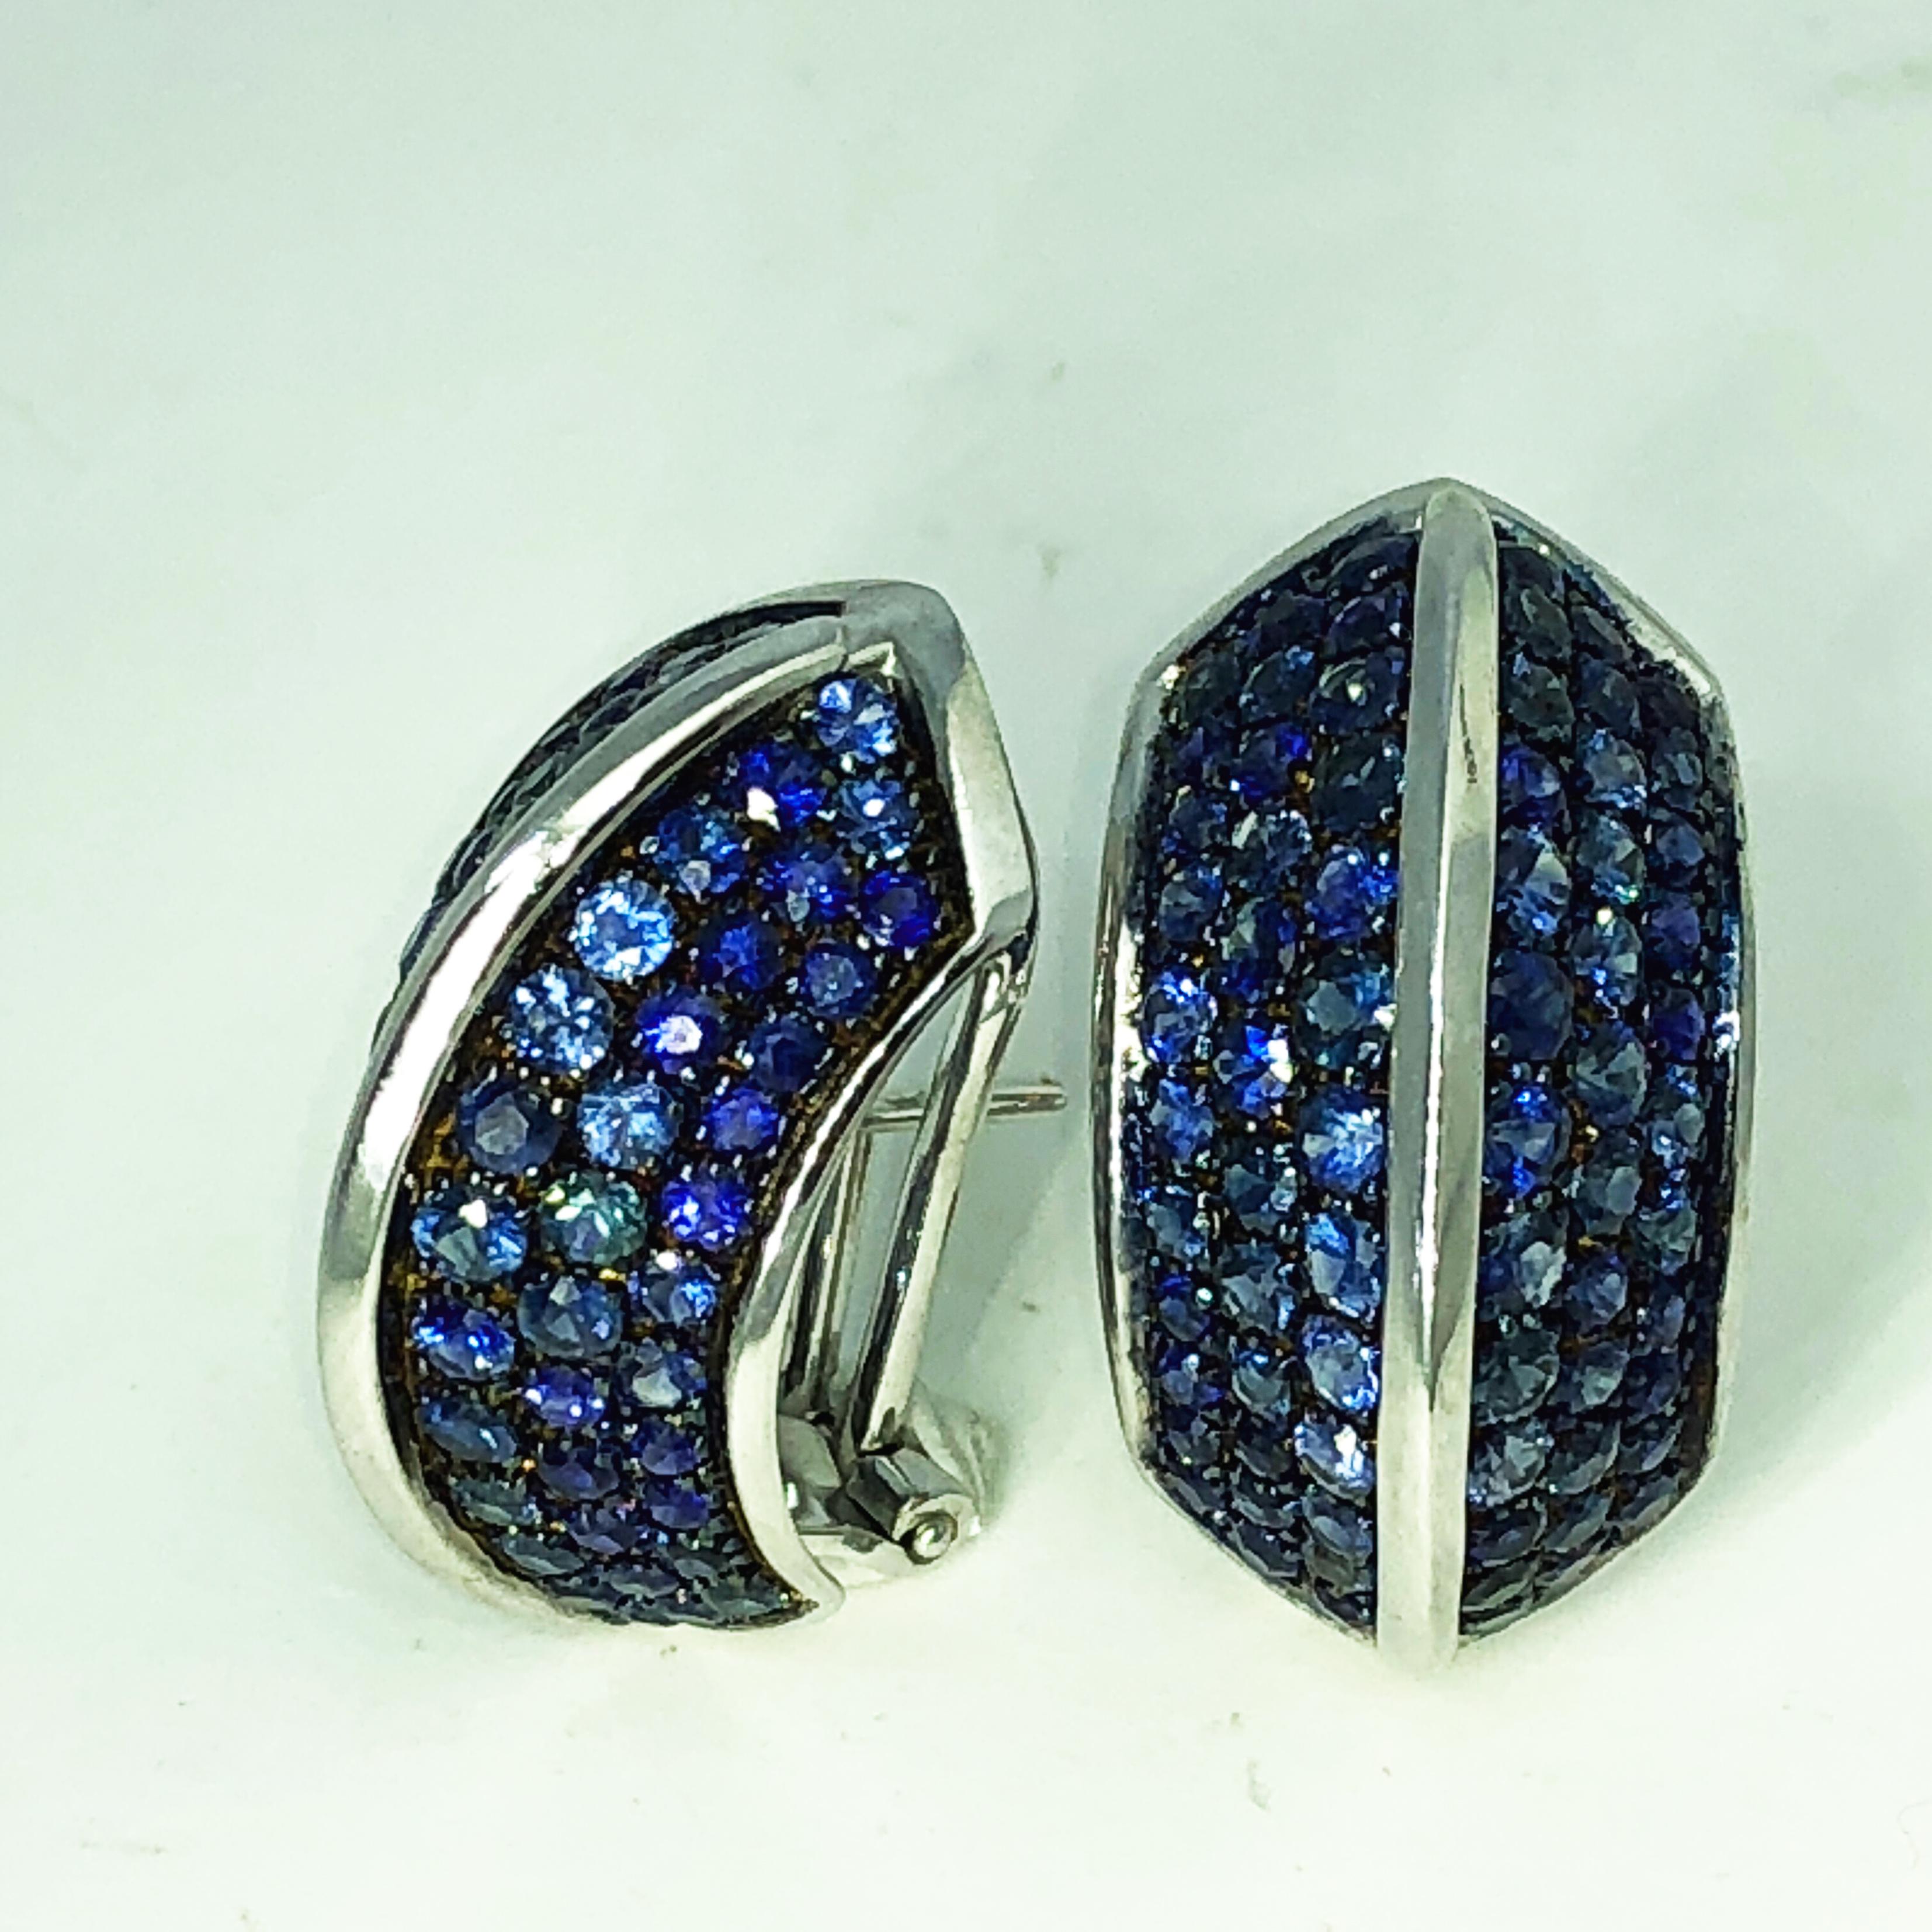 Brilliant Cut Berca 5.72 Natural Blue Sapphire Black White Gold Pyramid Shaped Earrings For Sale